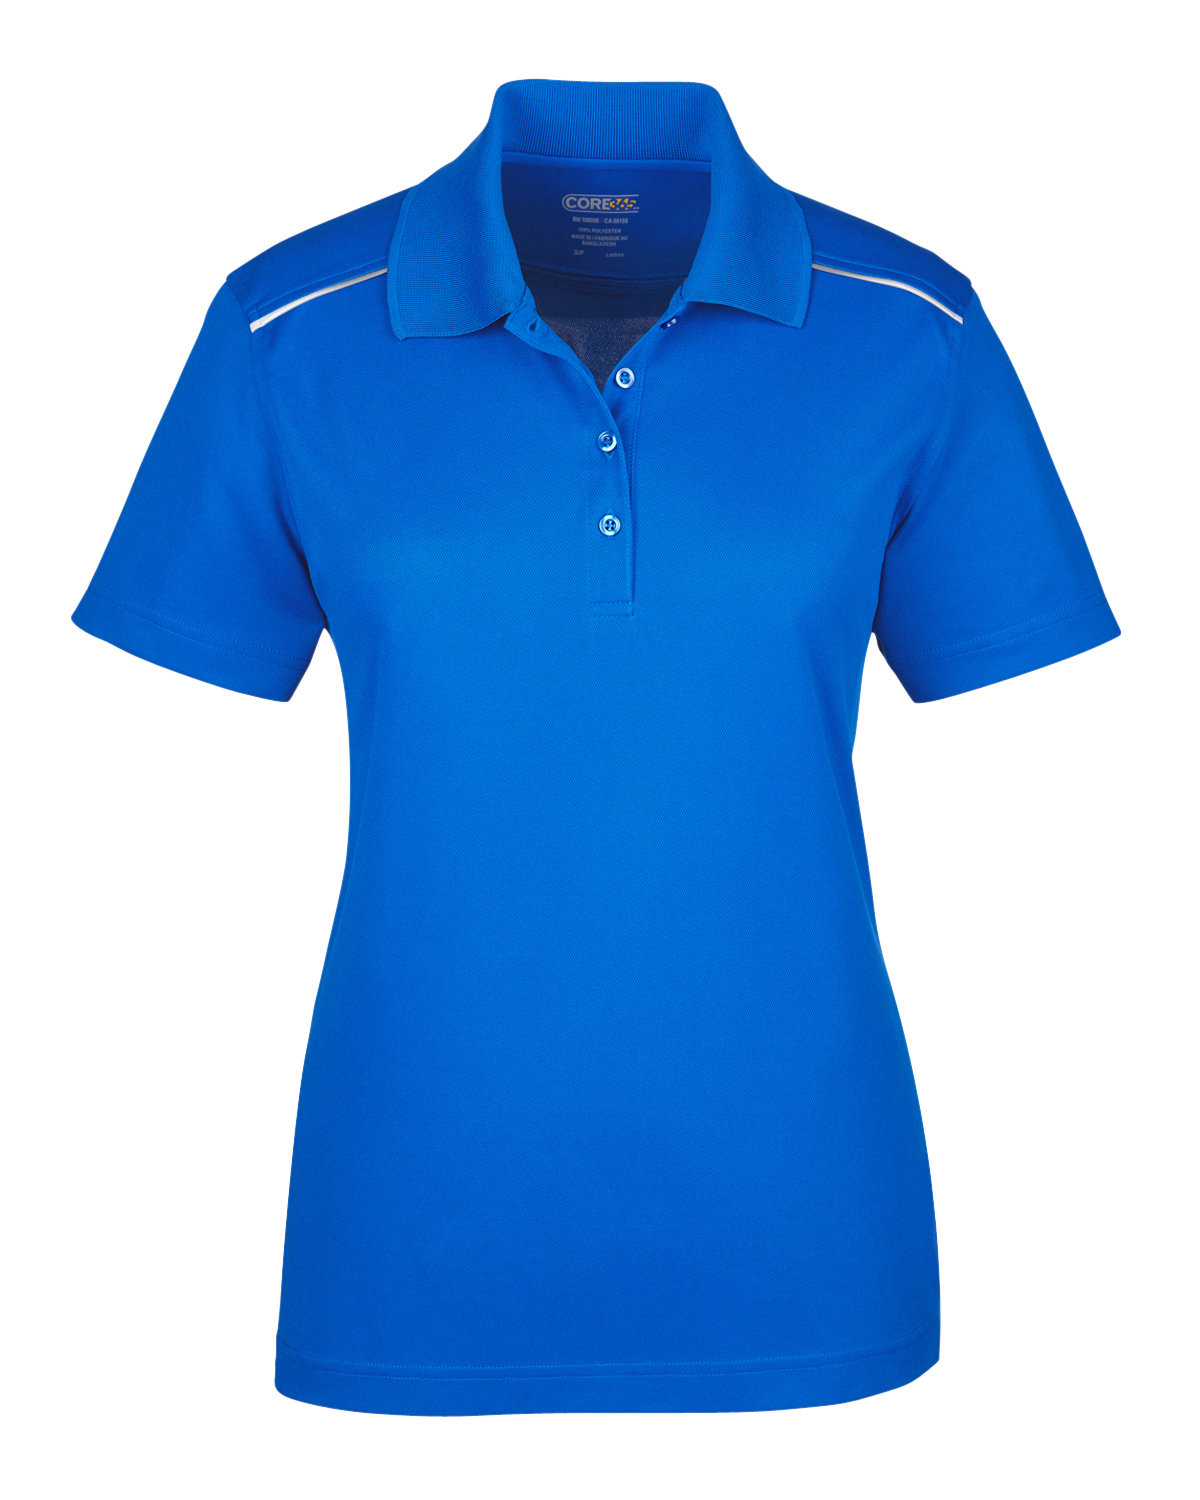 CORE365 Ladies' Radiant Performance Piqué Polo with Reflective Piping ...